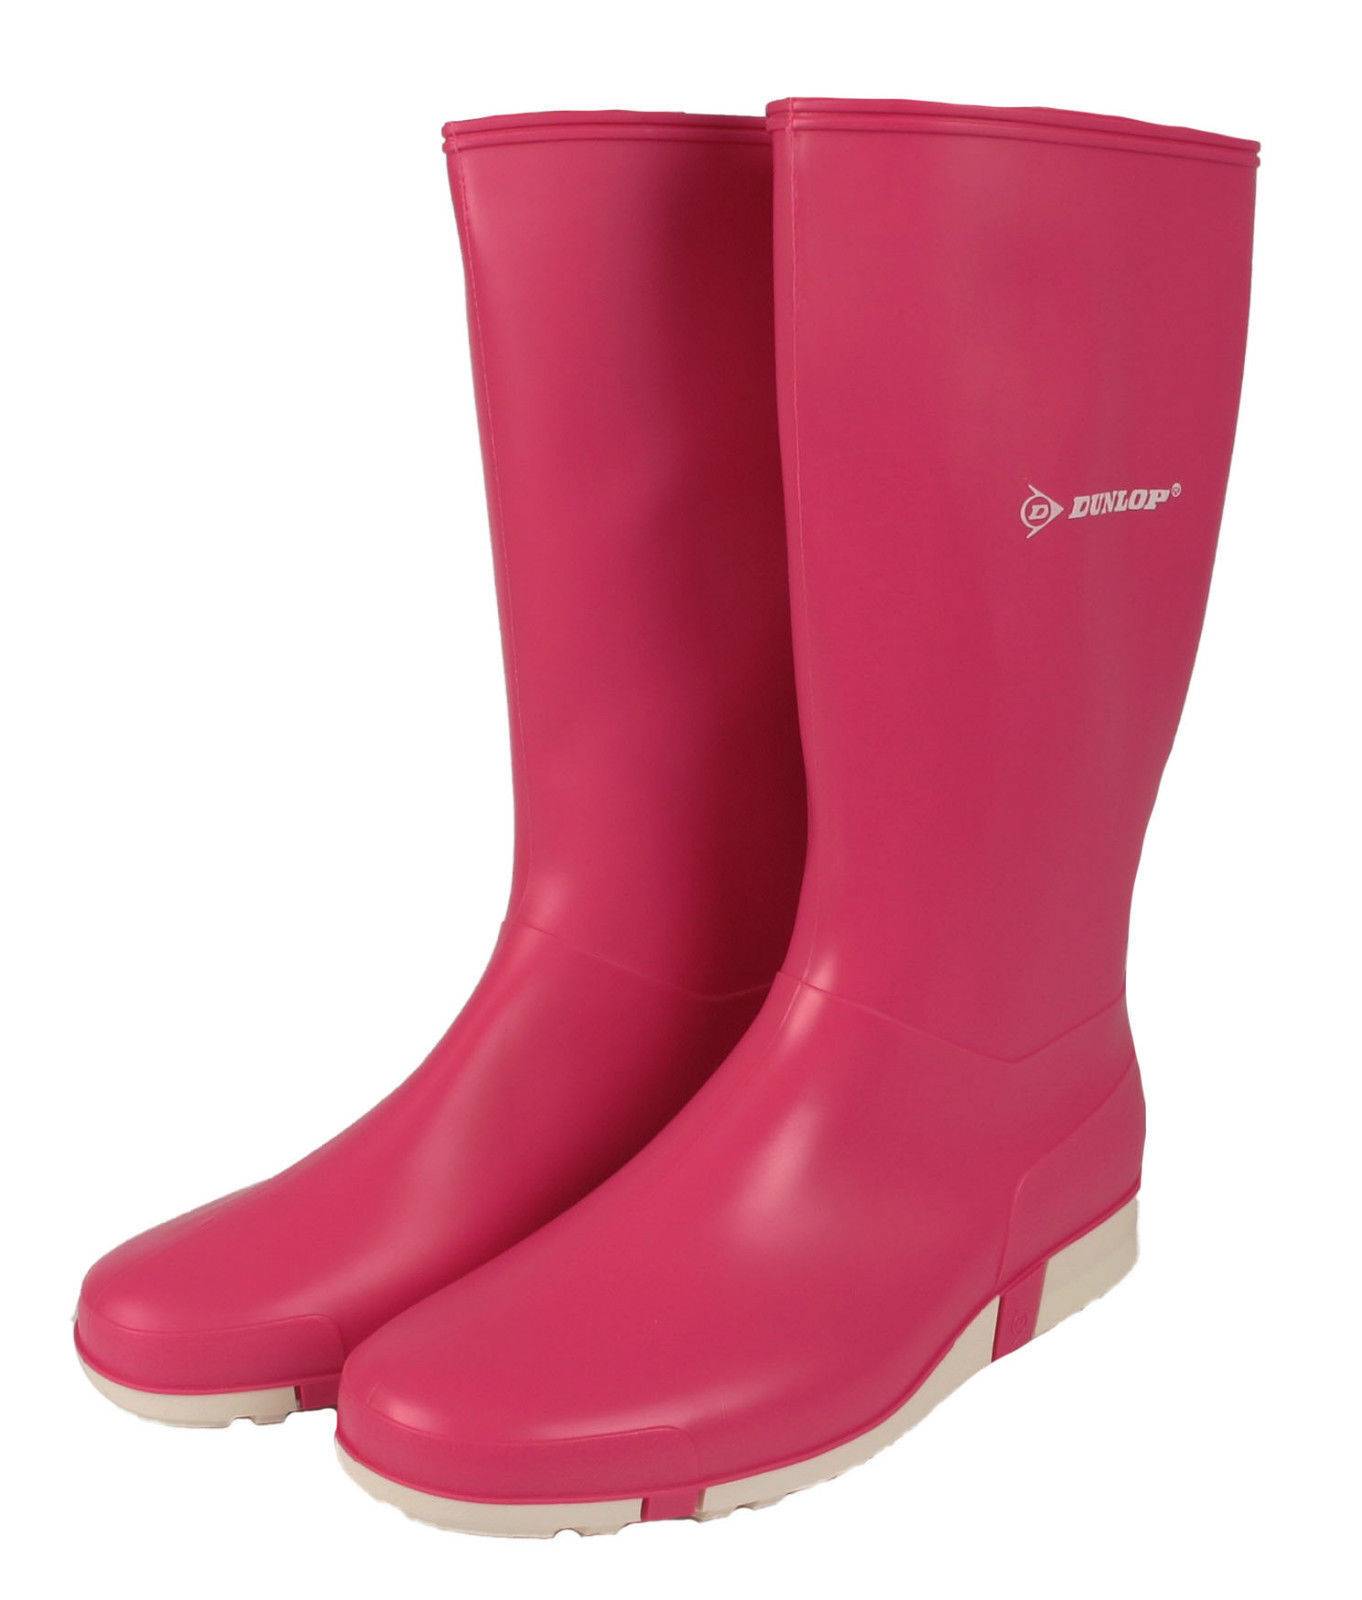 Ladies Pink Wellies Dunlop Wellington pull on Boots Sport Sizes 2 3 4 5 ...